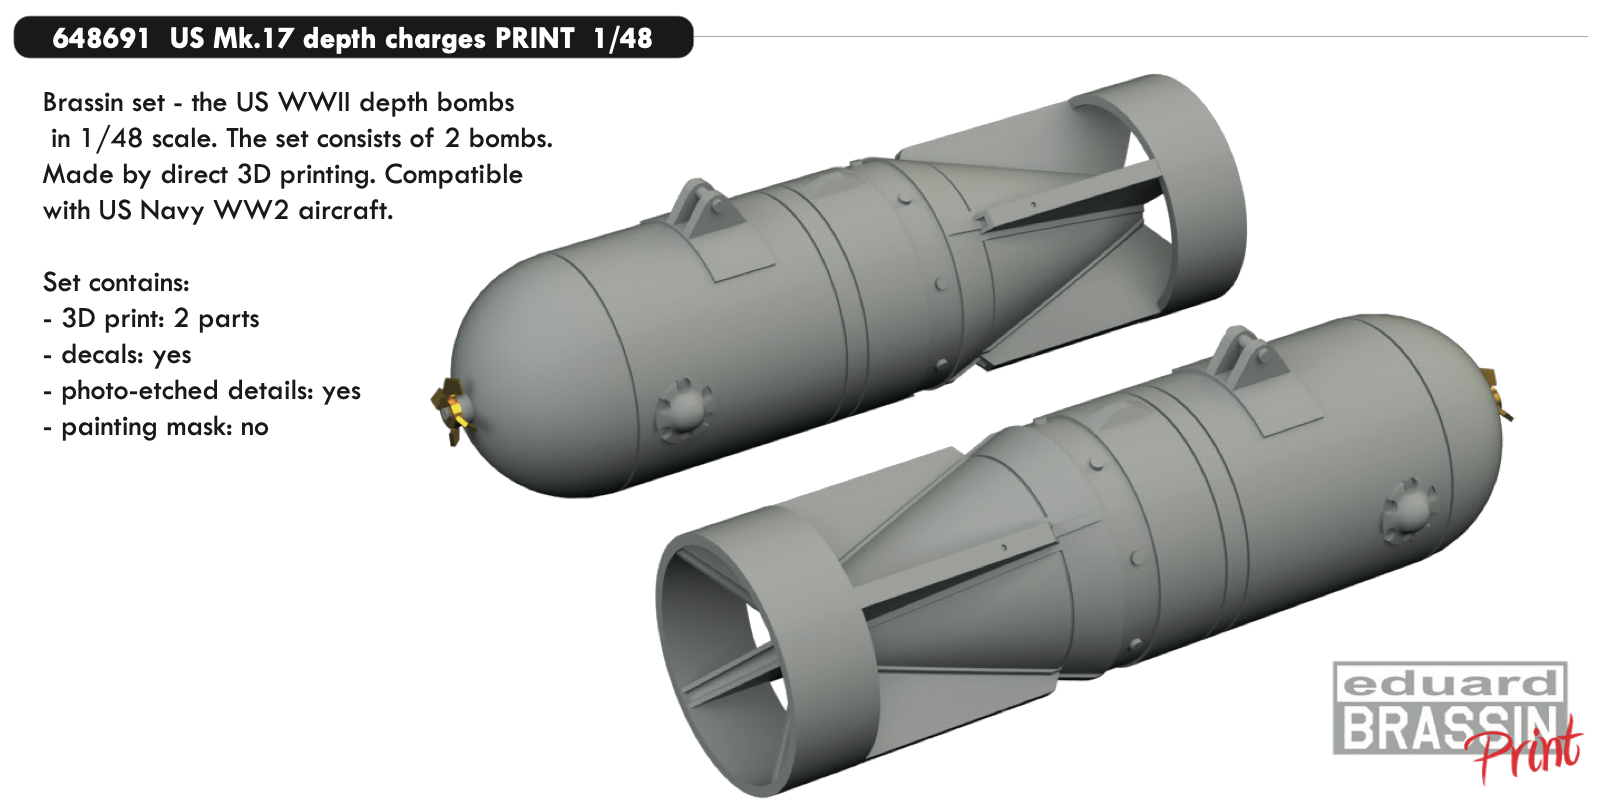 Additions  (3D resin printing) 1/48  US Mk.17 depth charges 3D-Printed 1/48 